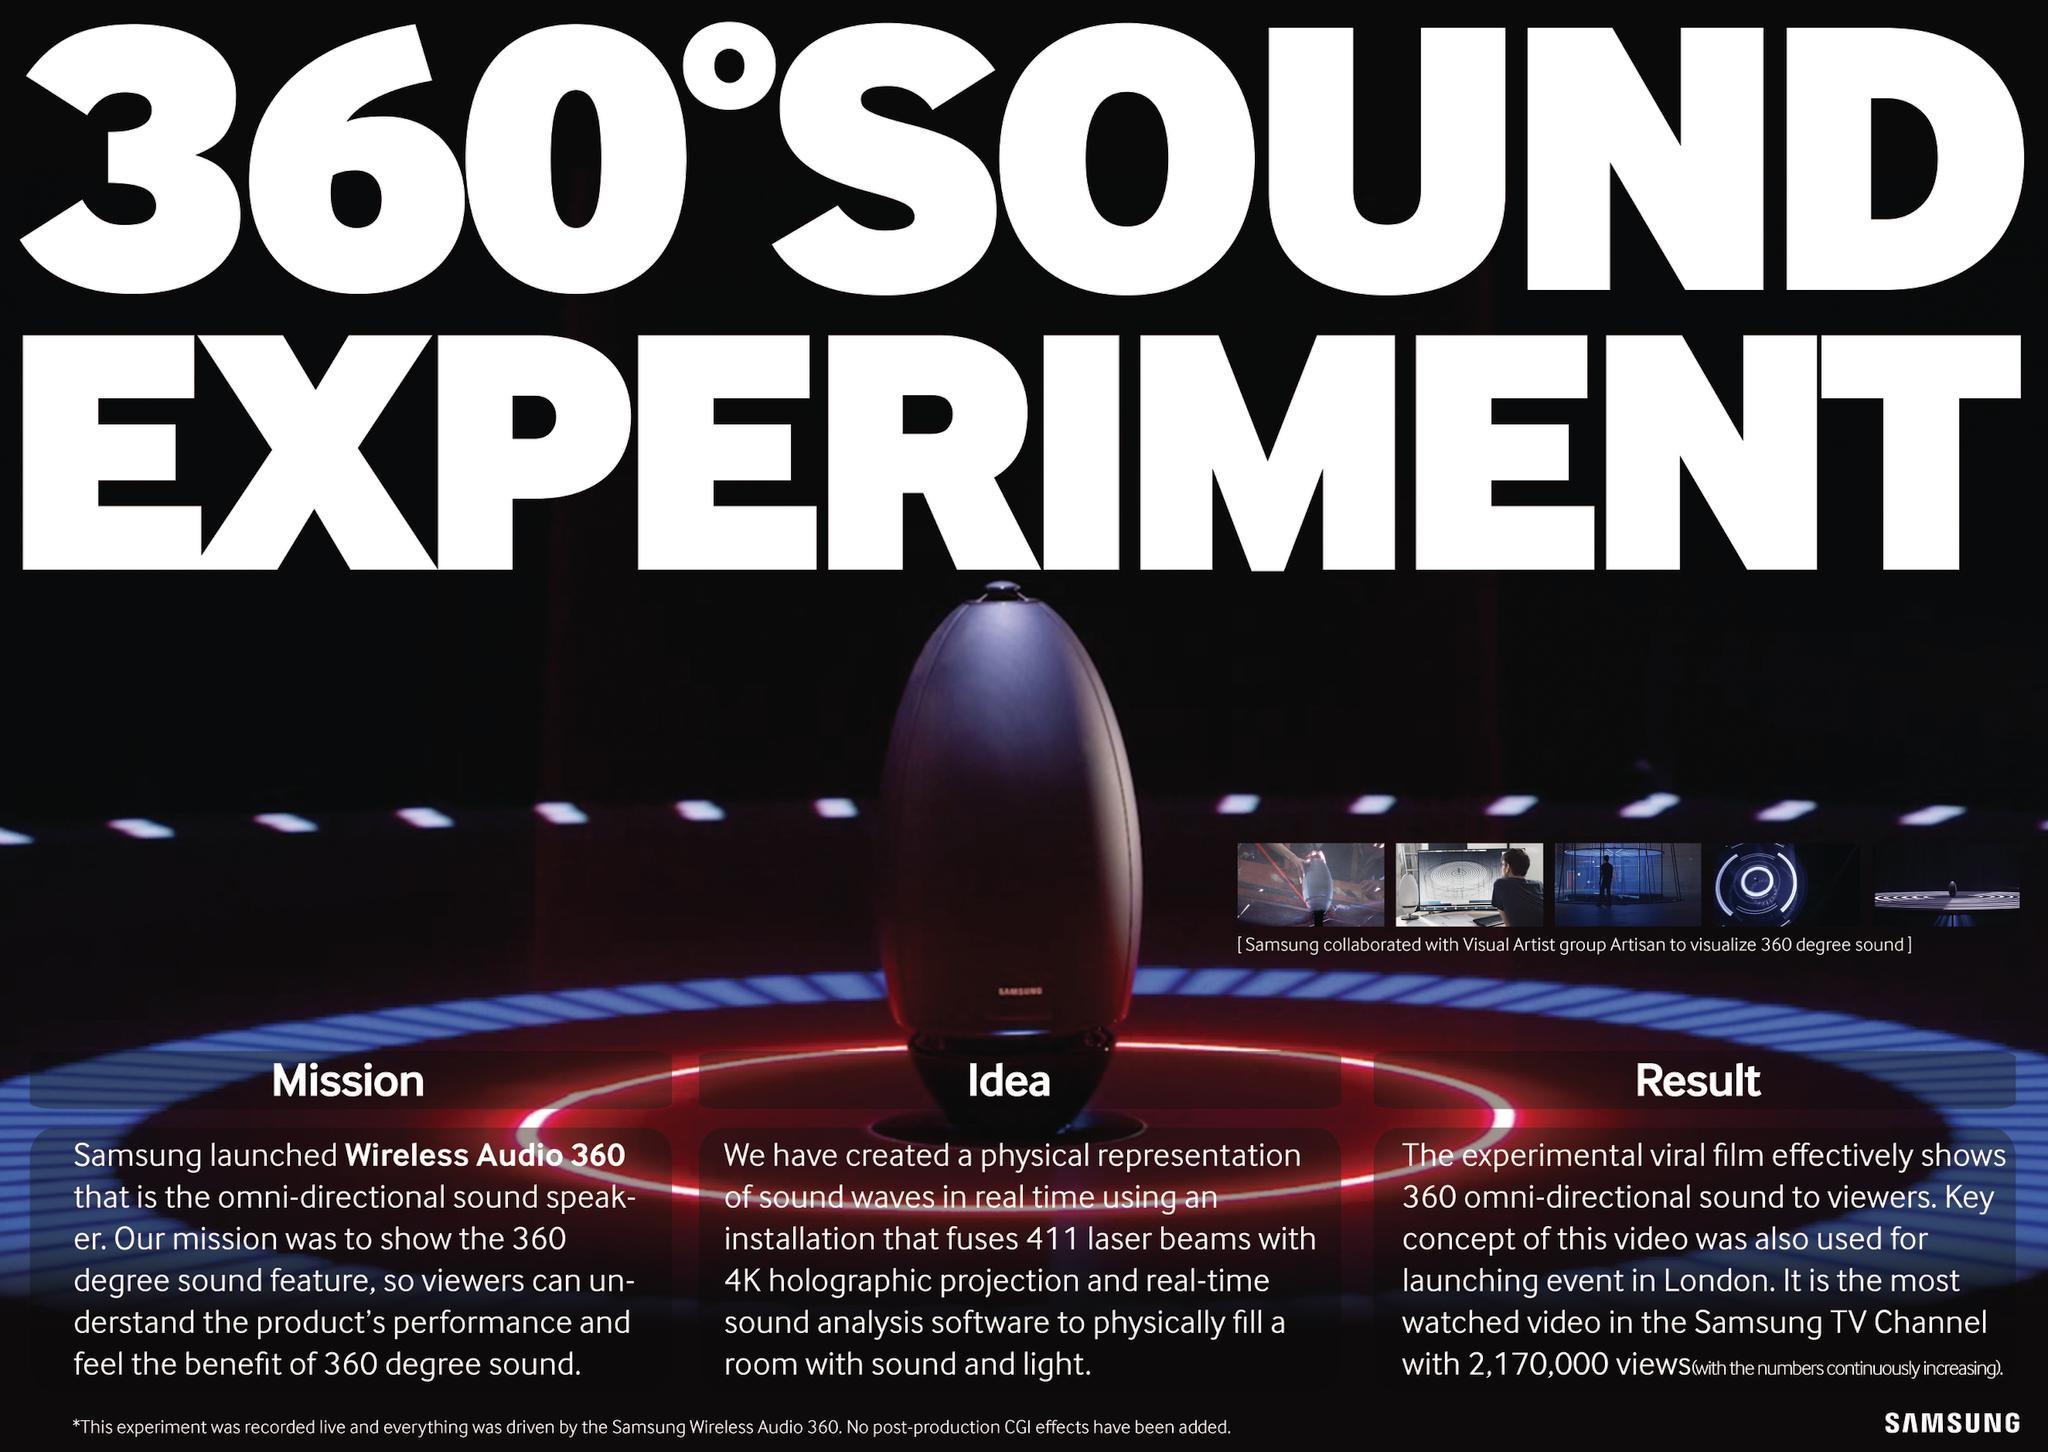 The 360 Sound Experiment